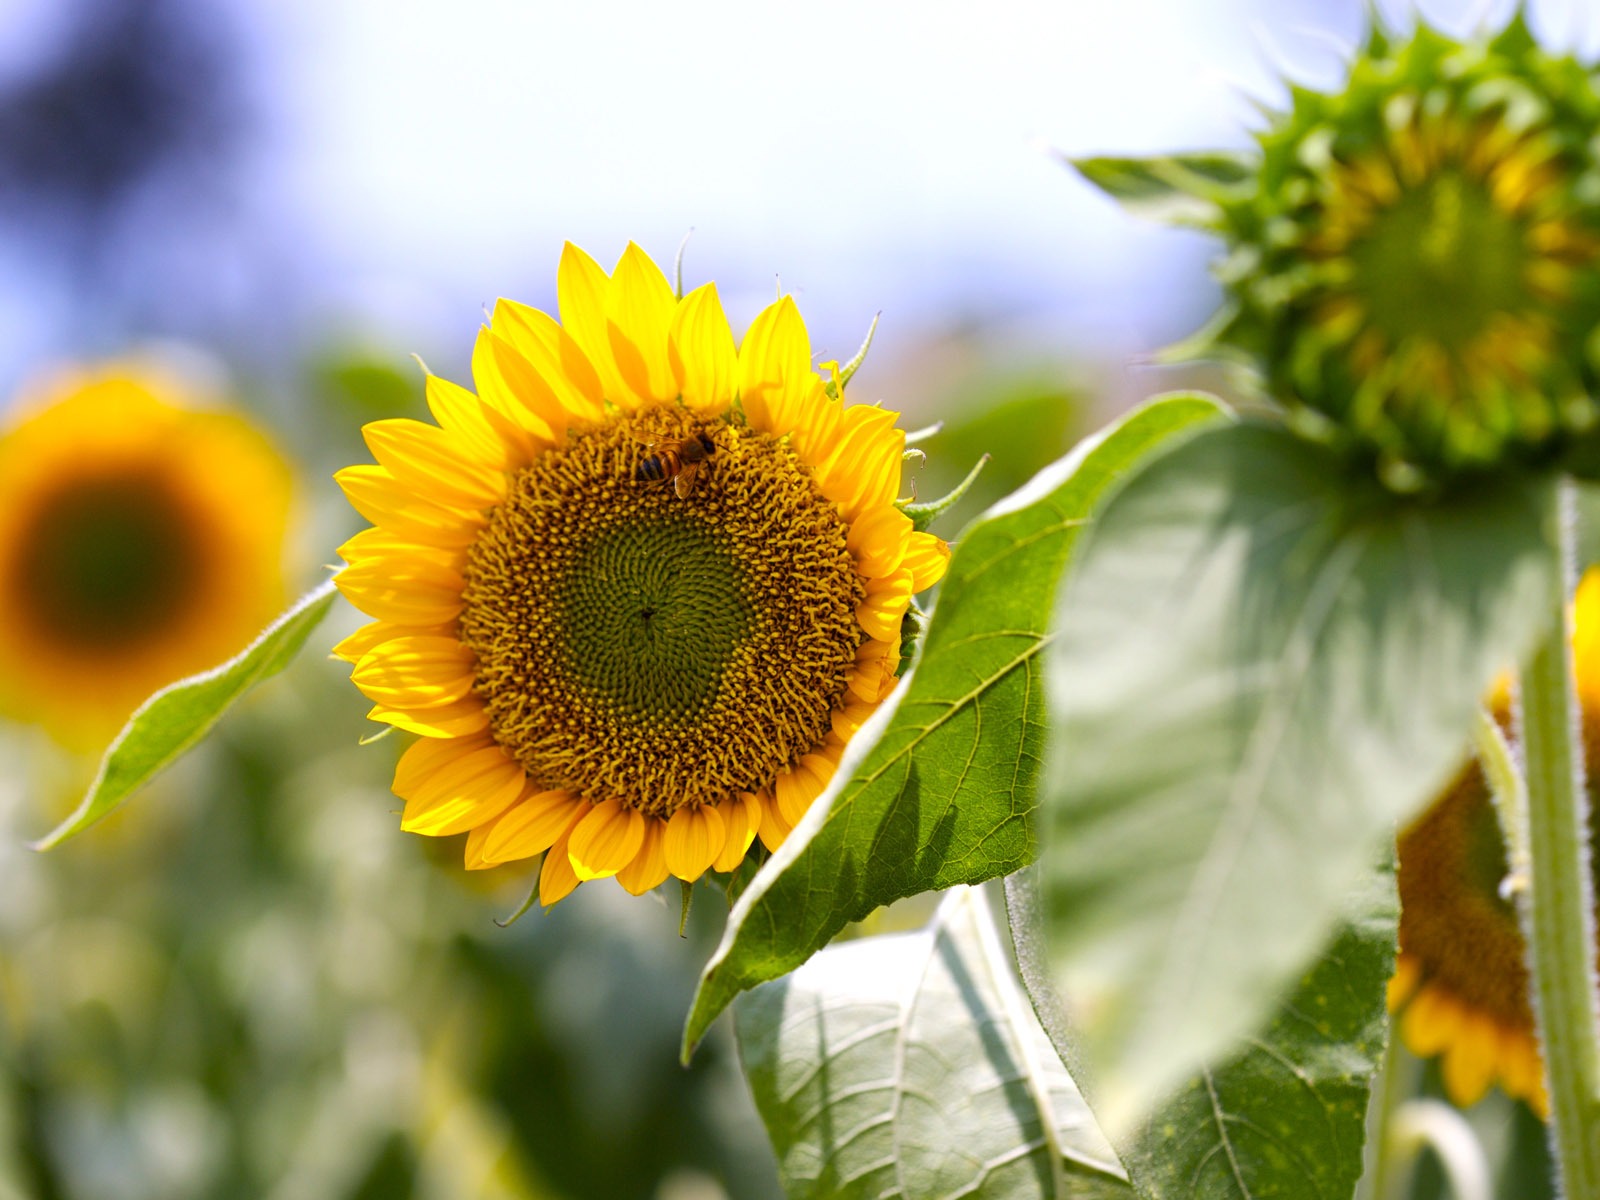 Sunny sunflower photo HD Wallpapers #21 - 1600x1200